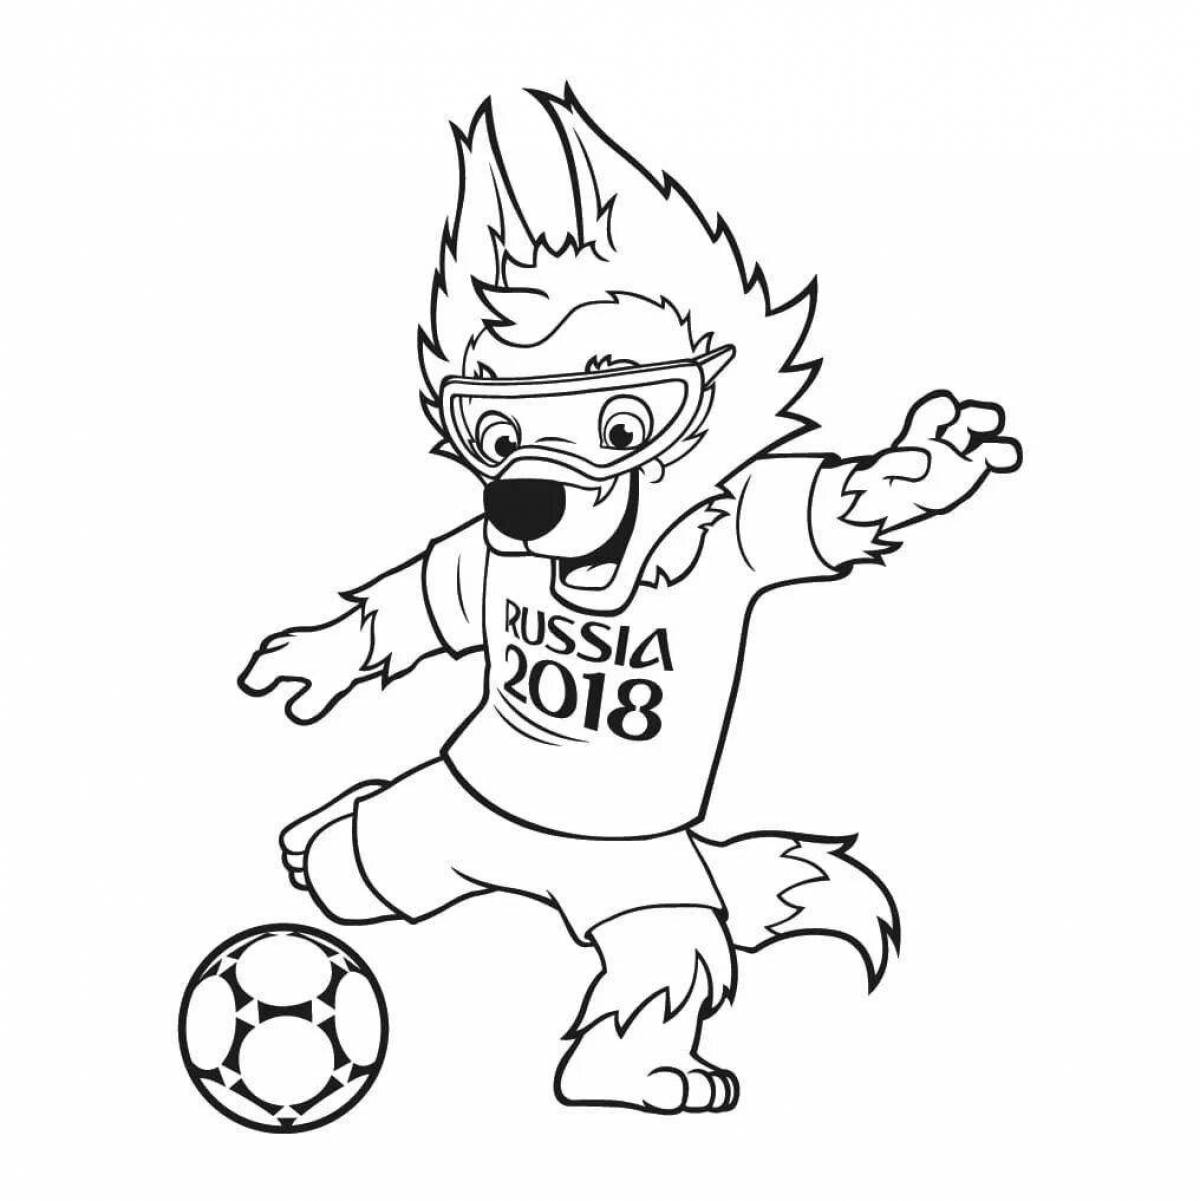 Coloring page Glorious World Cup 2022